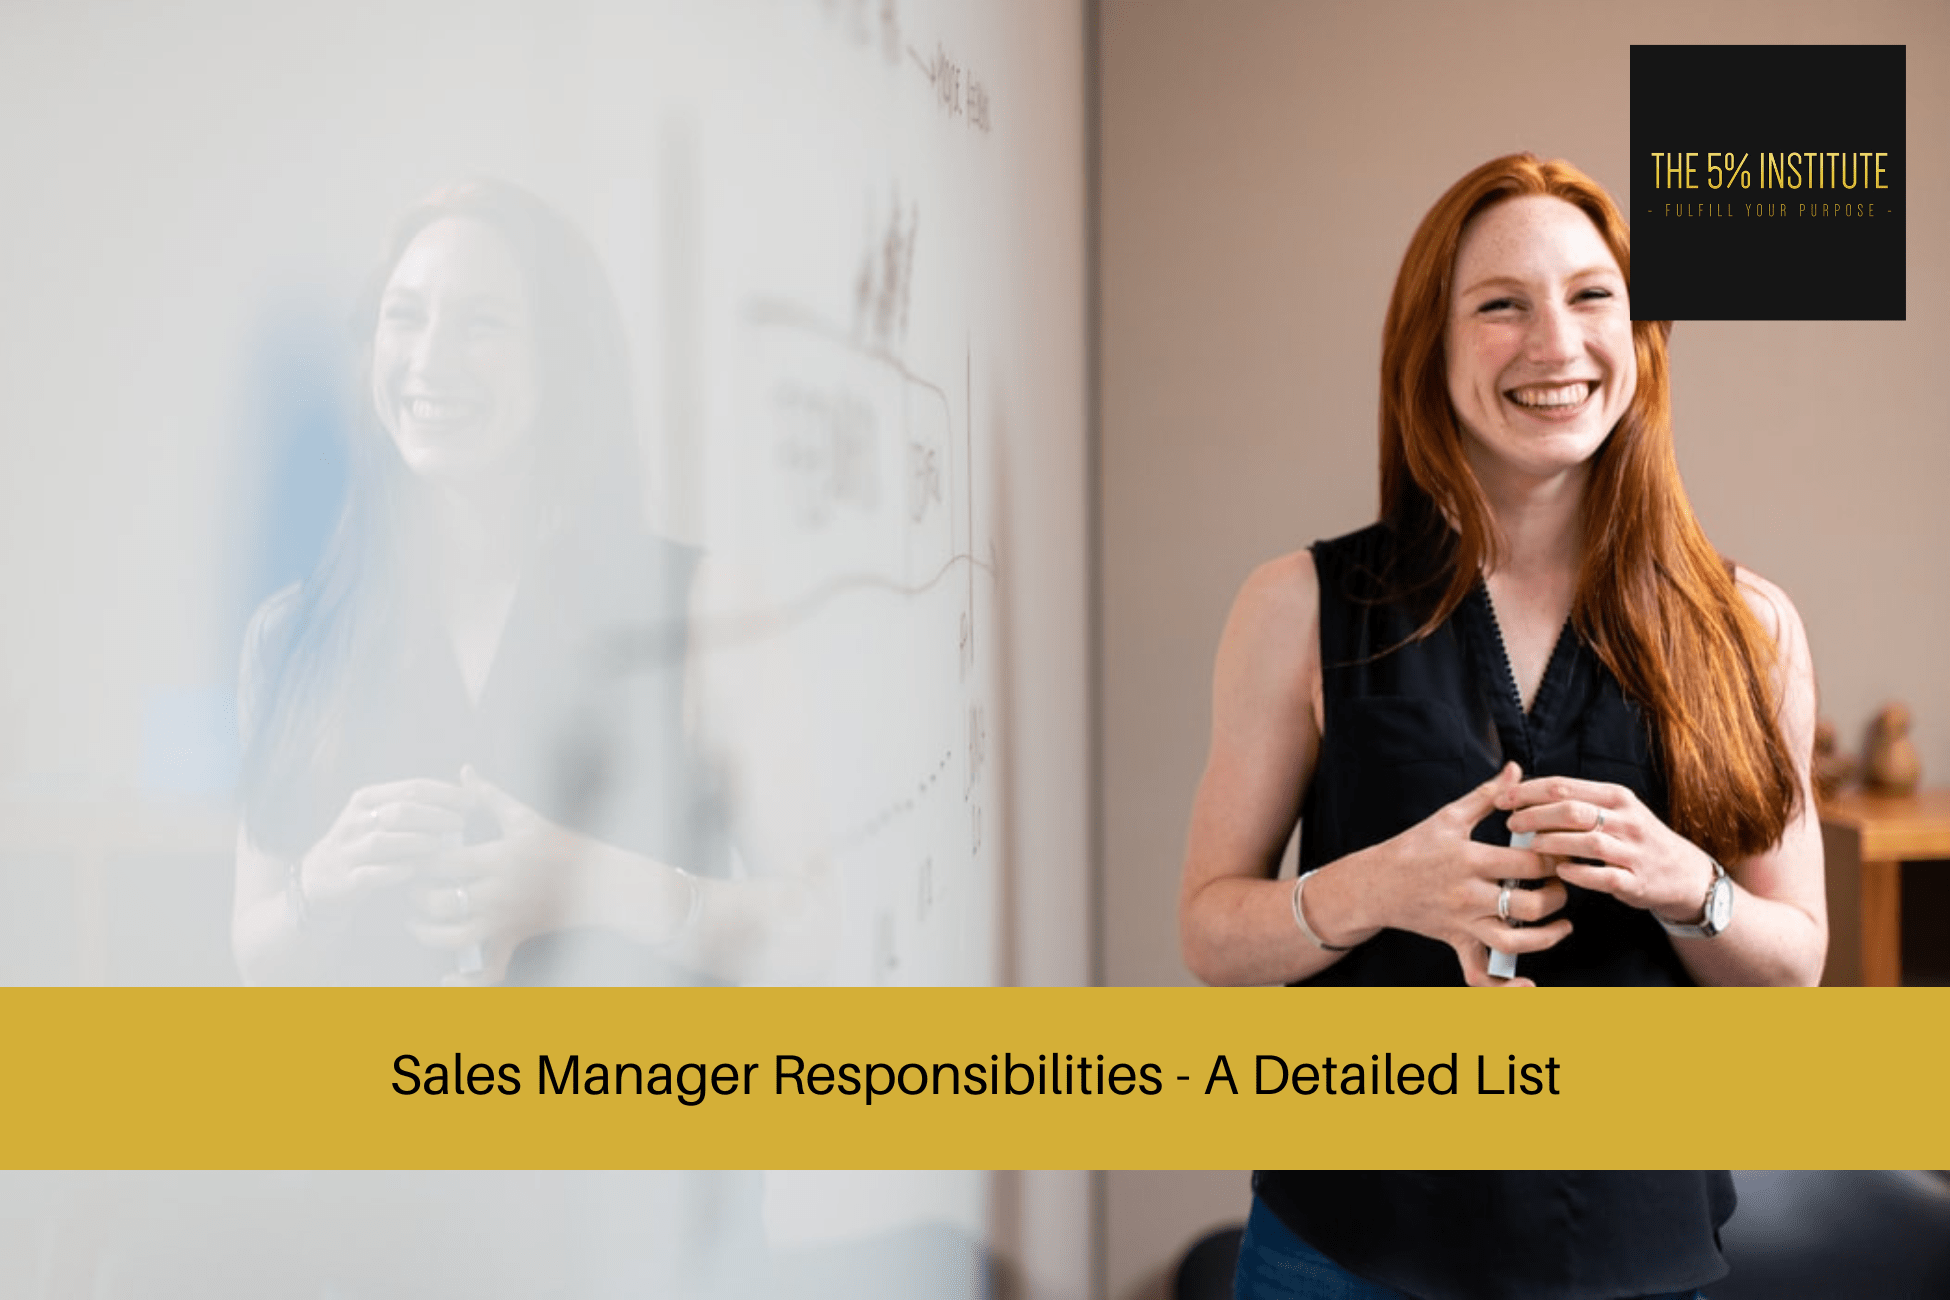 Sales Manager Responsibilities - A Detailed List